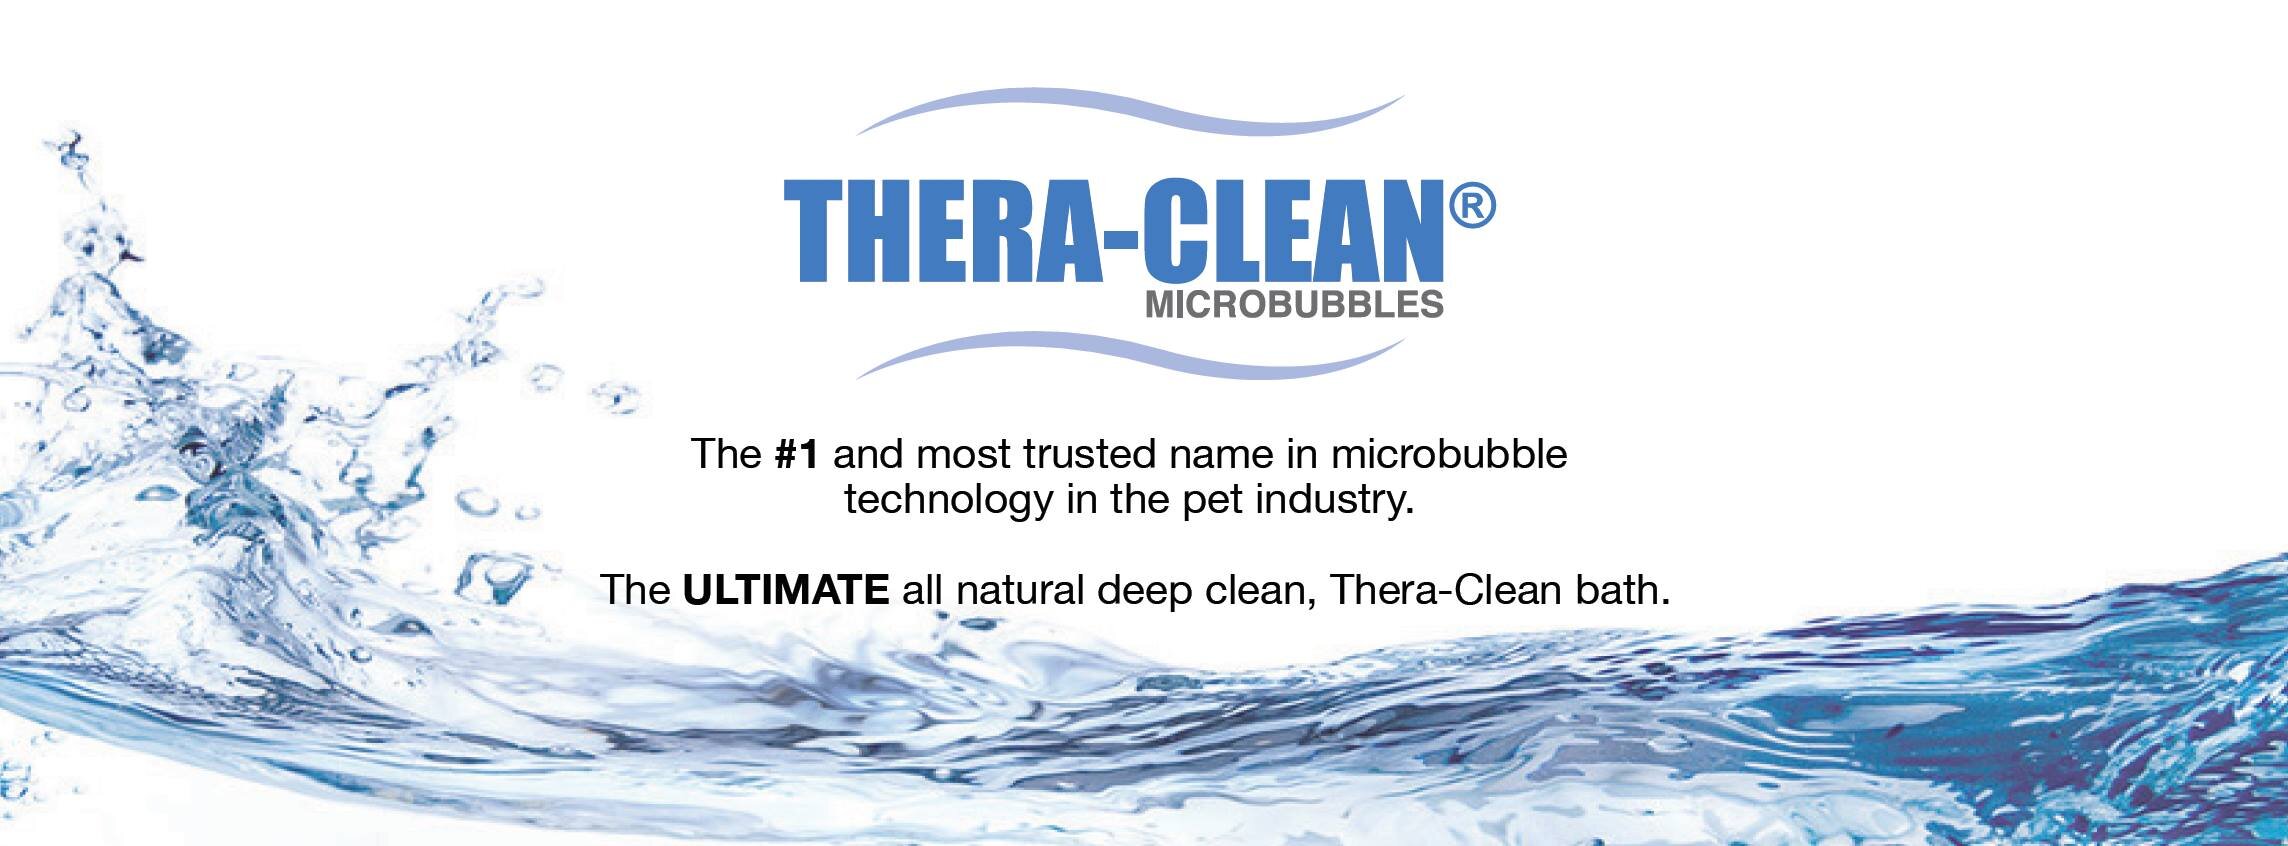 We offer Thera-Clean!